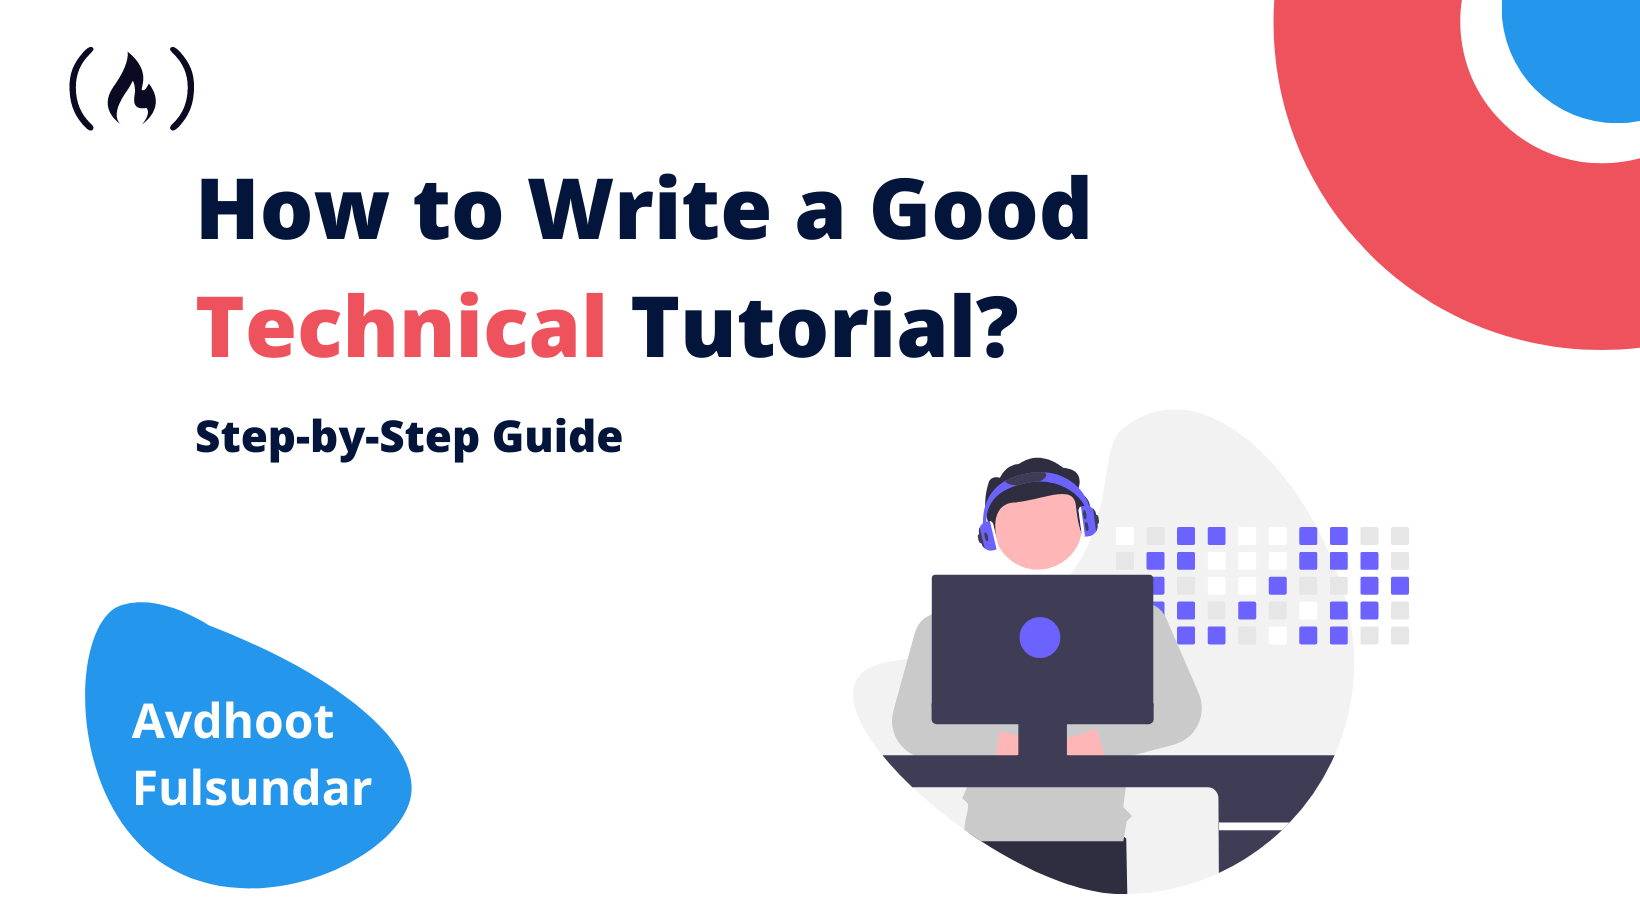 How to write a Good Technical Tutorial